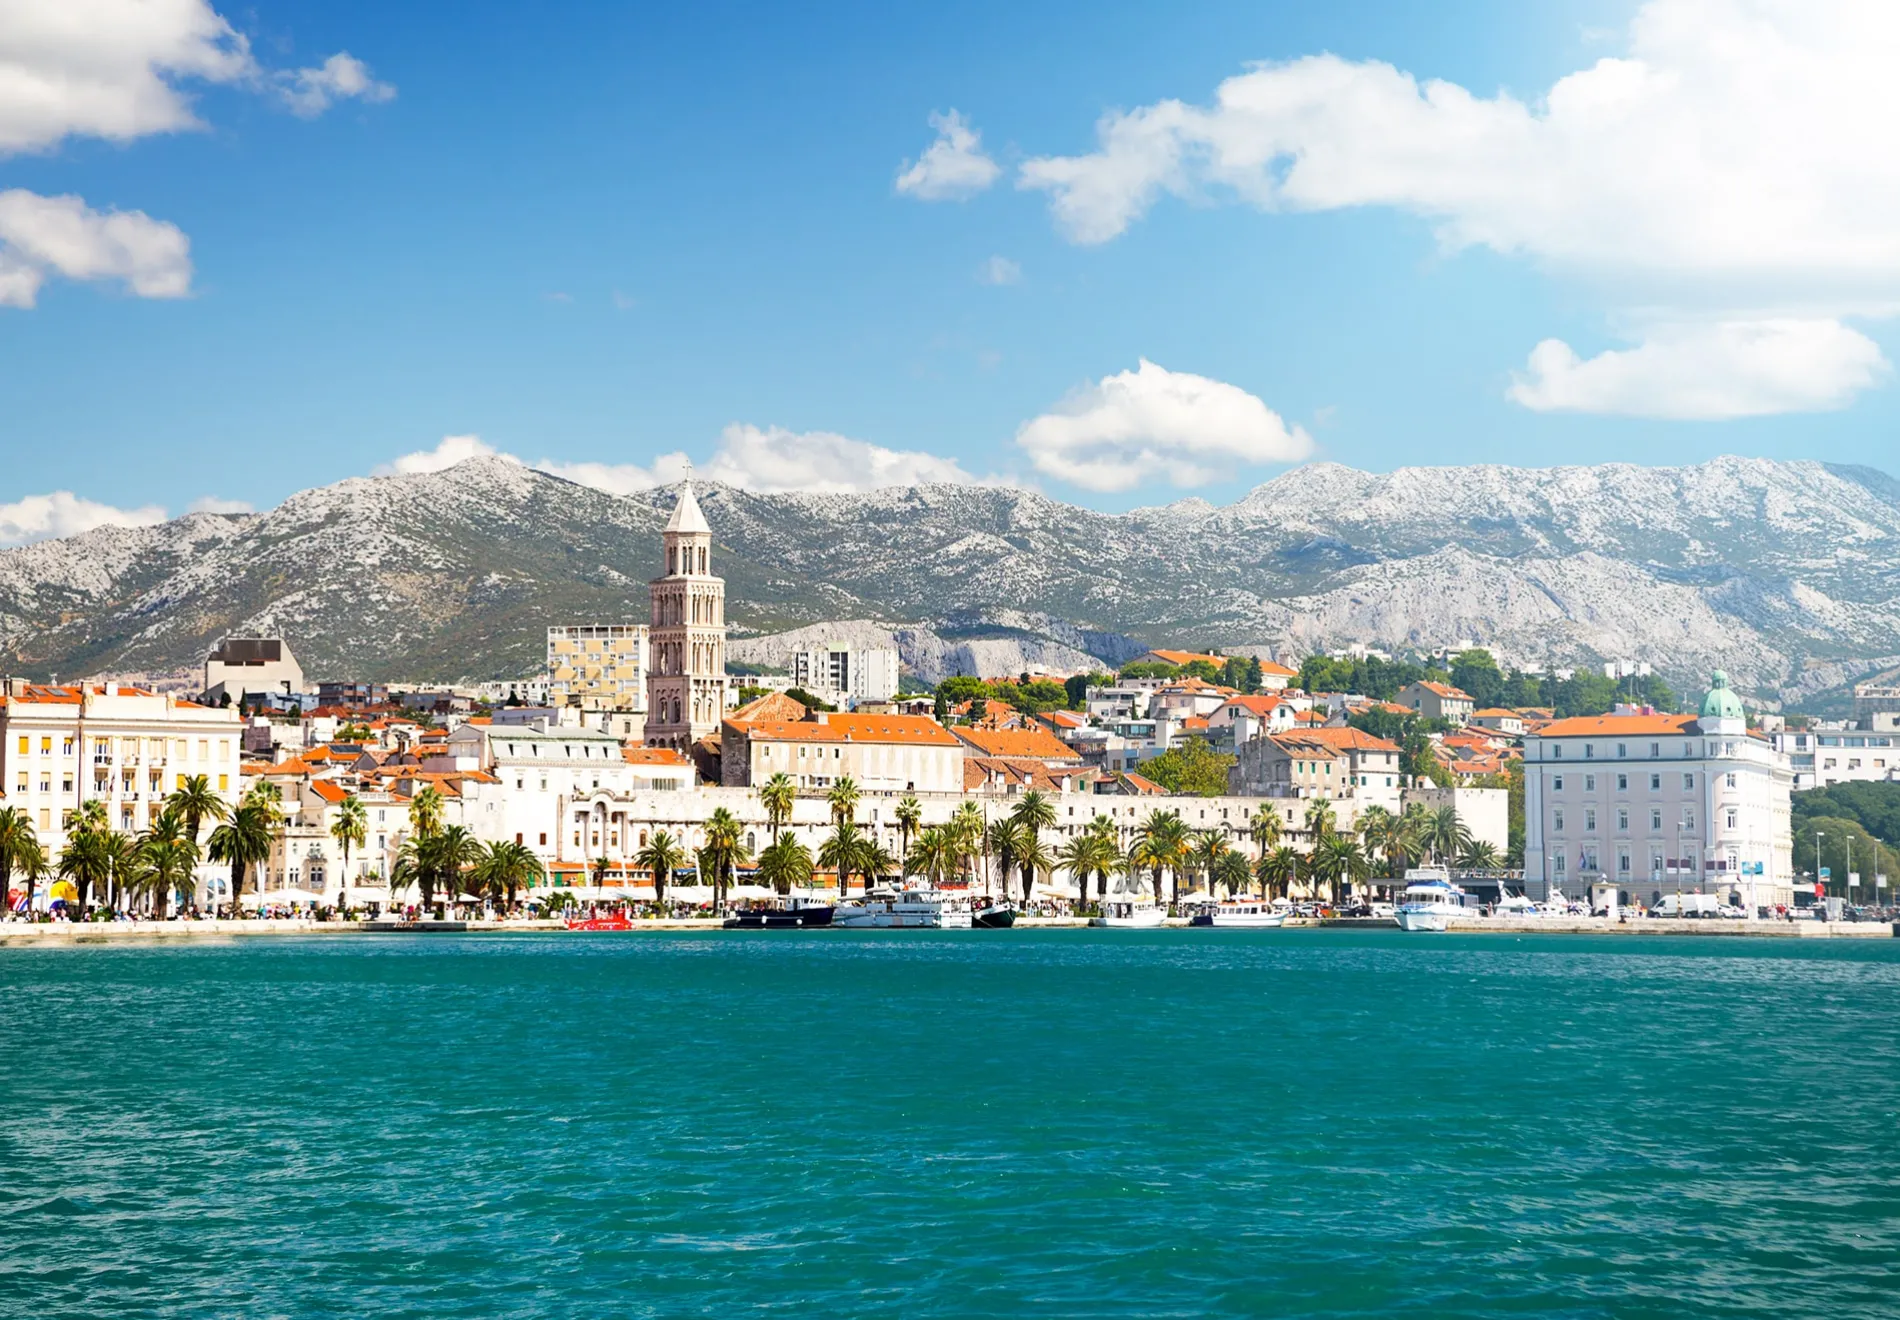 The second route is starting in Split and ending in Split